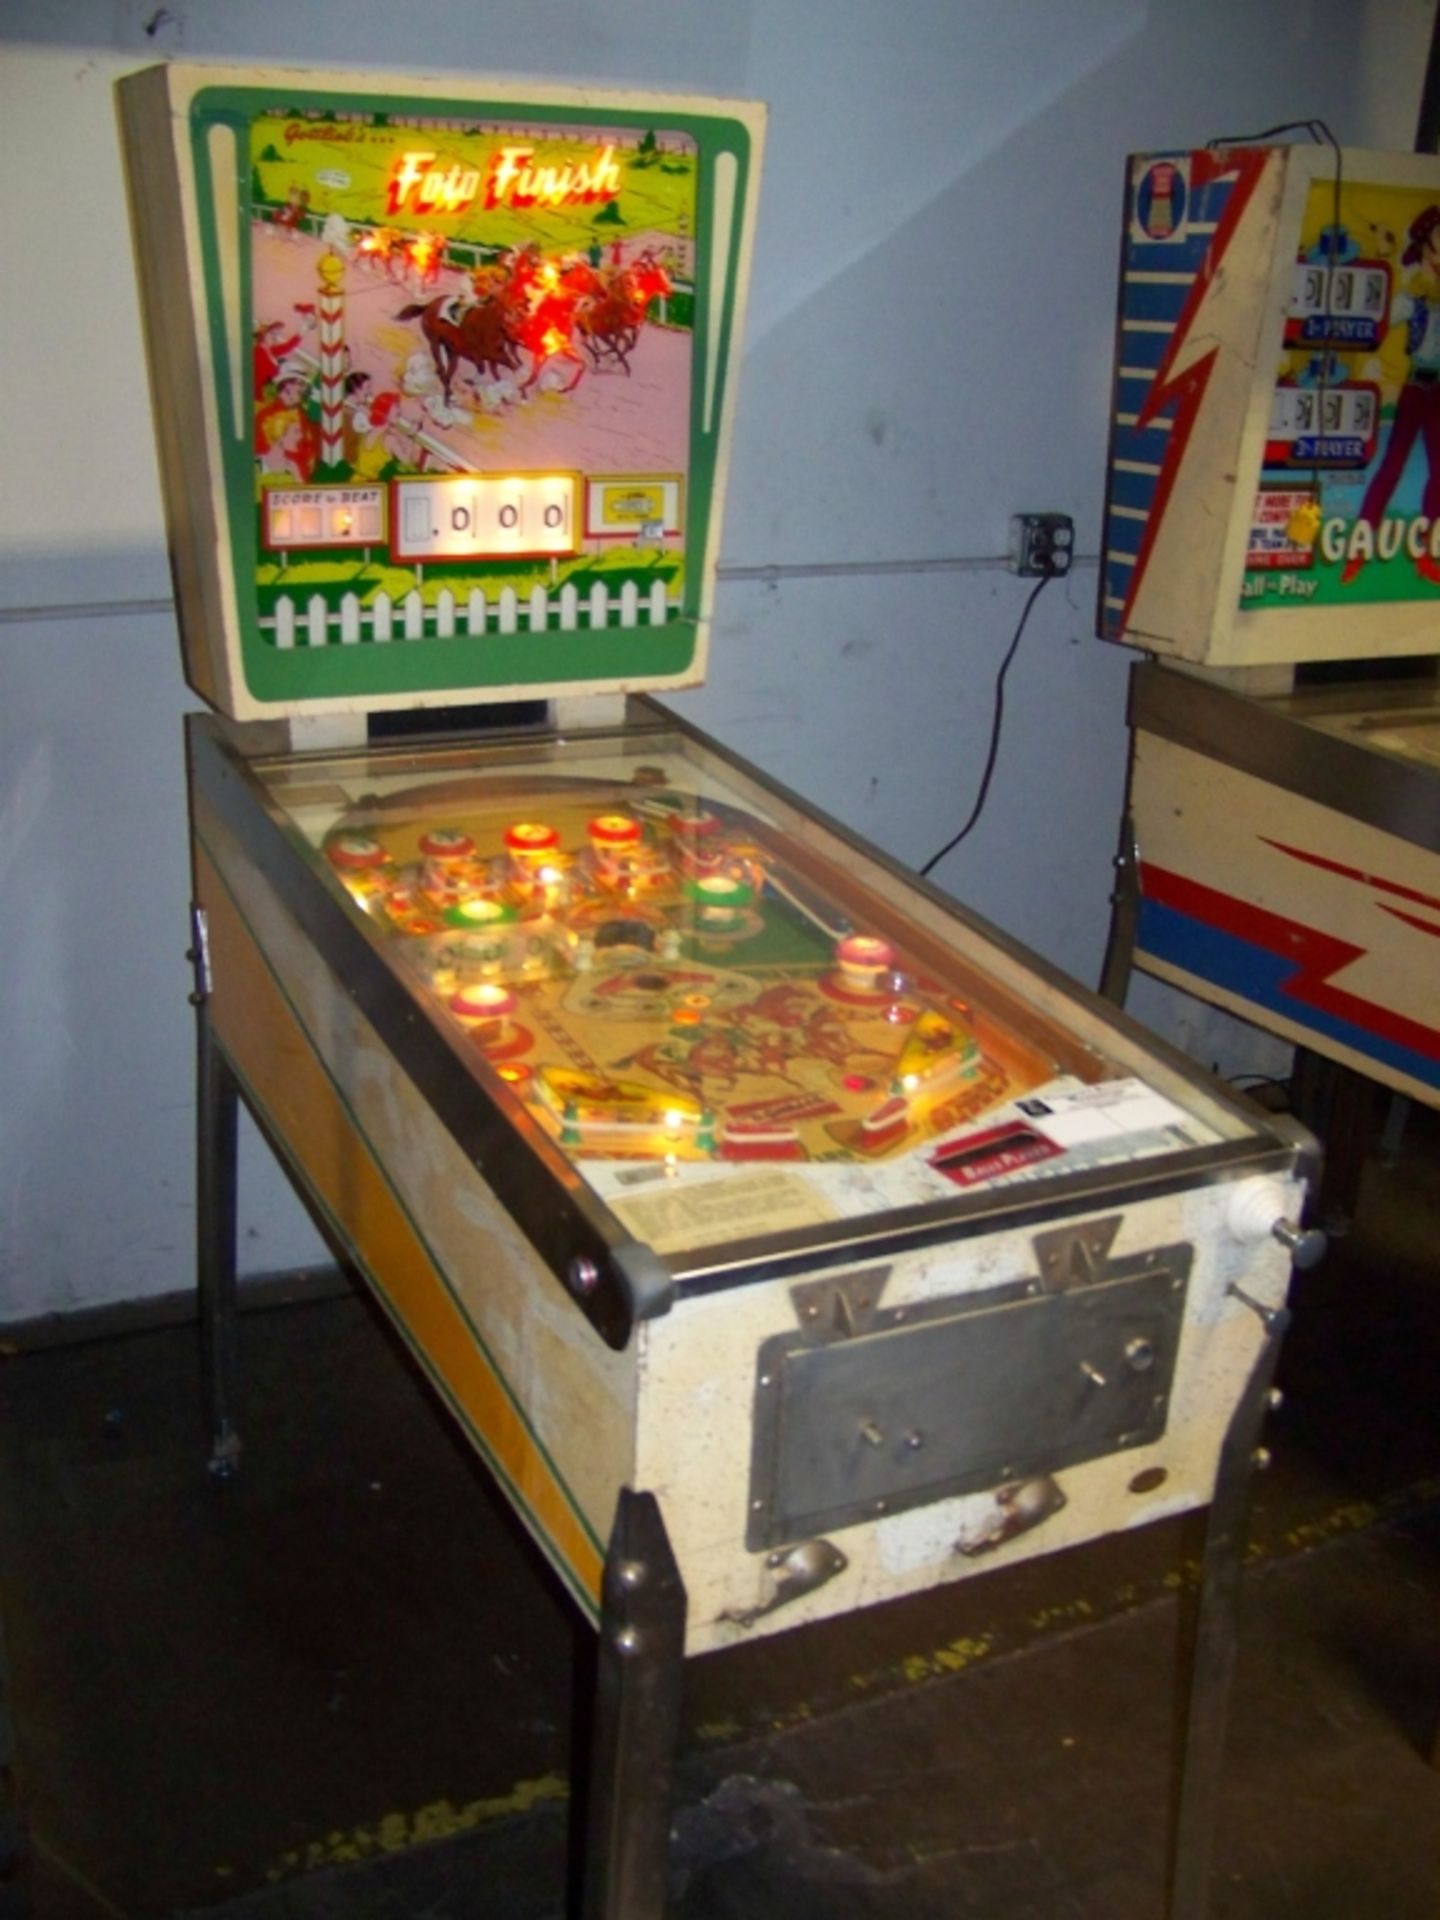 FOTO FINISH PINBALL MACHINE GOTTLIEB 1961 Item is in used condition. Evidence of wear and commercial